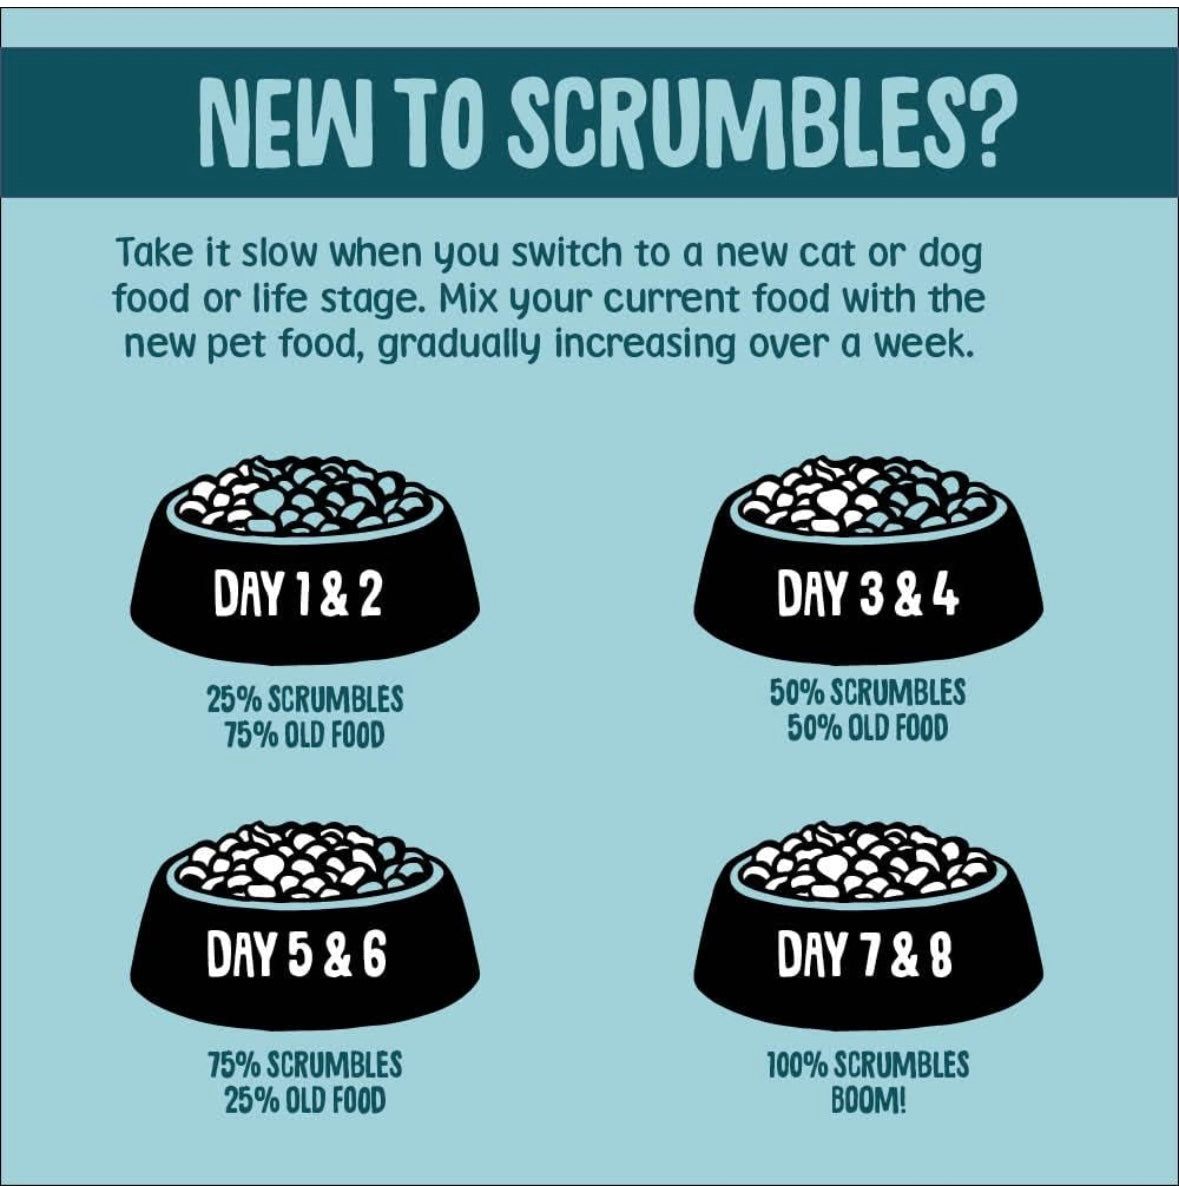 Scrumbles Gnashers Daily Dental Sticks for Dogs, Pack of 7